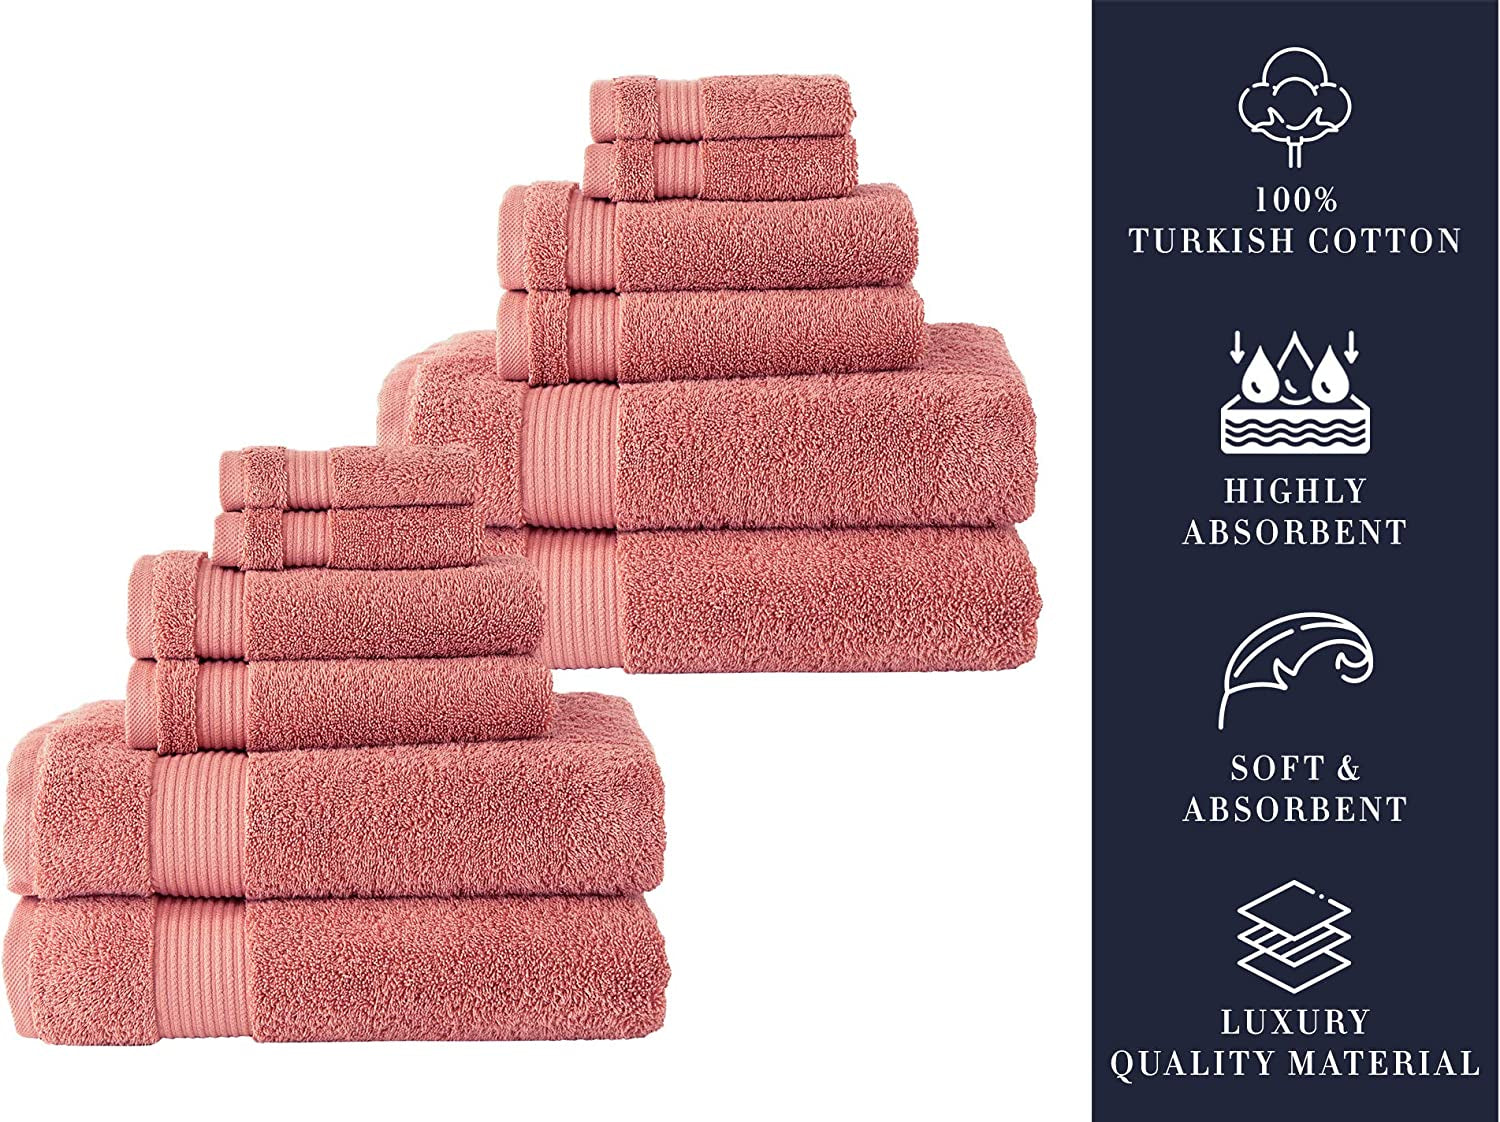 - Luxury Towel Set for Bathroom, 100% Turkish Cotton, Quick Dry, Soft and Absorbent Bath Towels, Hand Towels, and Washcloths, Amadeus Collection - 12-Piece Set (Coral)